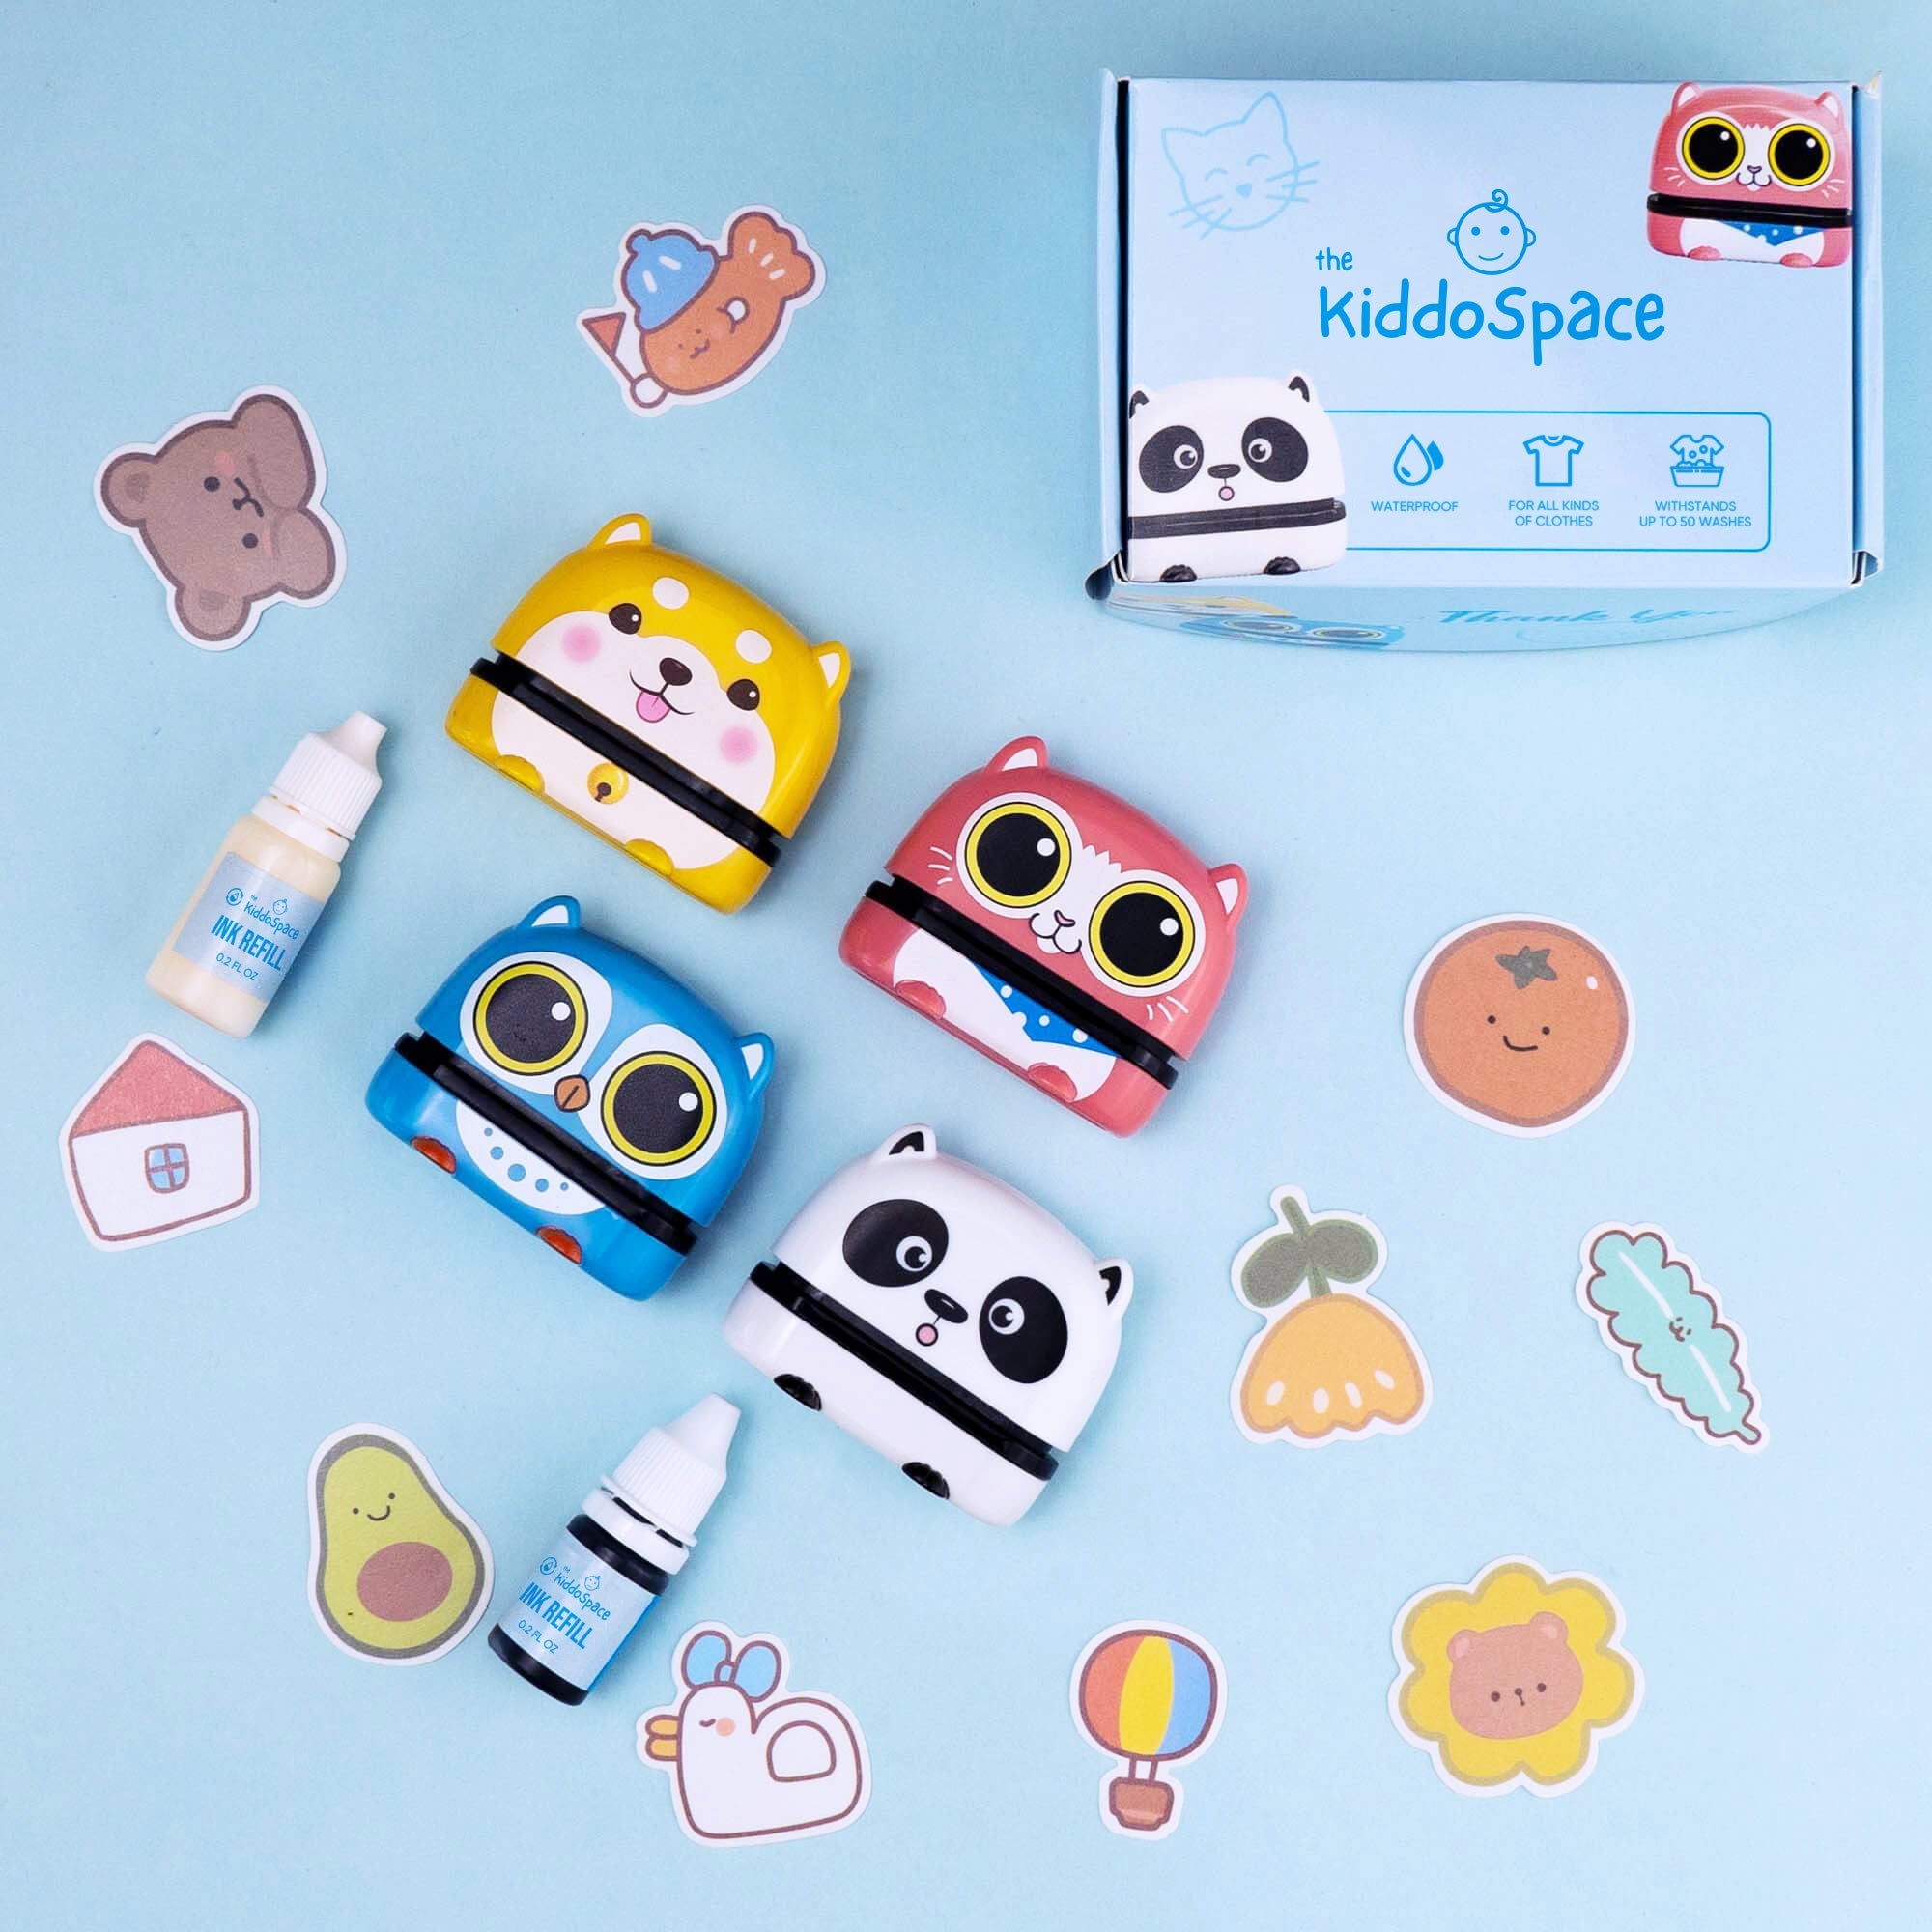 Kiddo Stamp, Product Categories